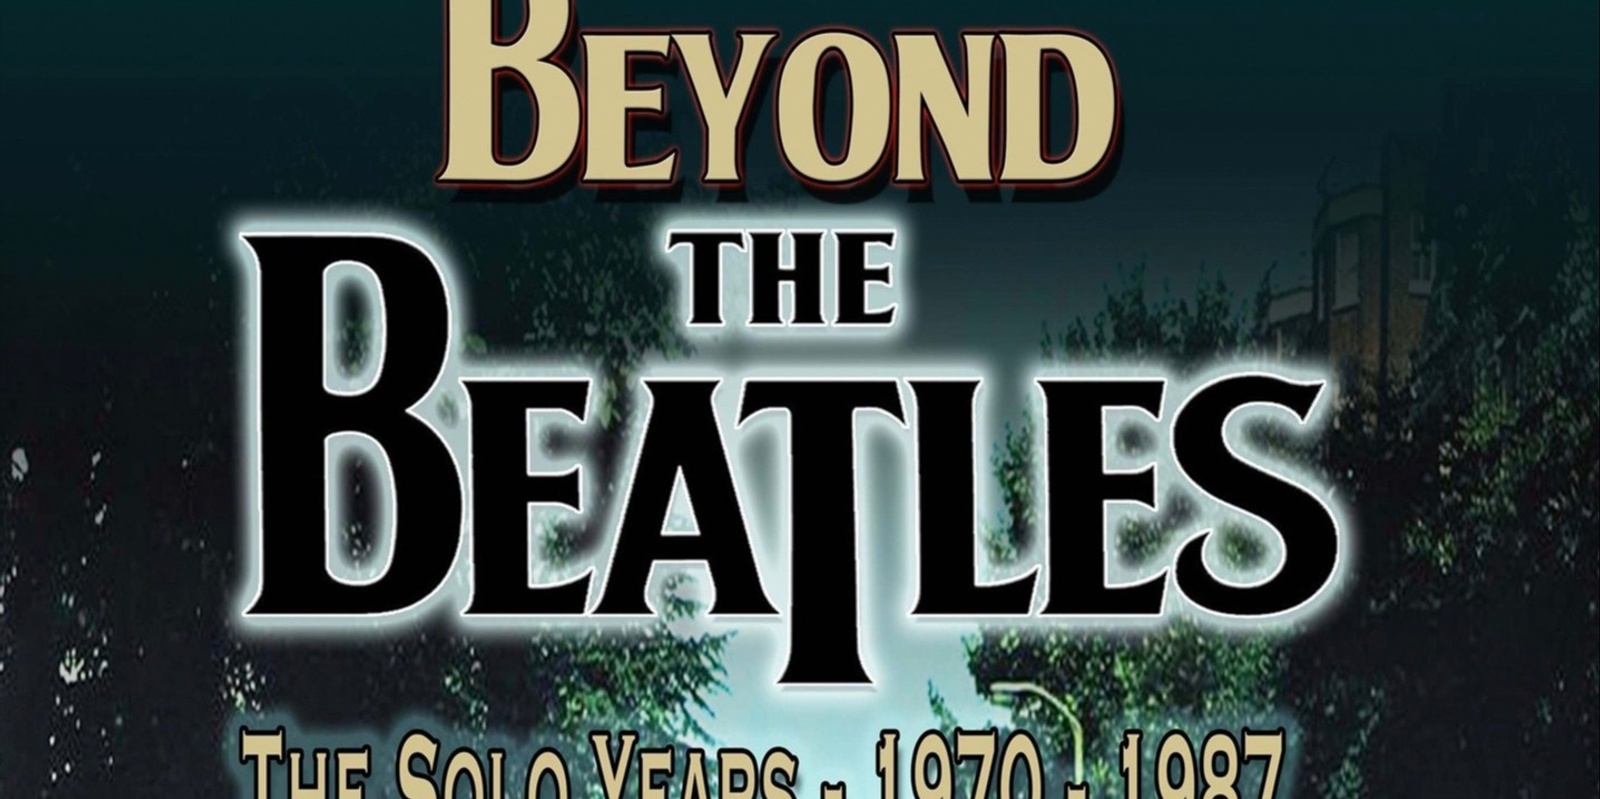 Banner image for Beyond The Beatles